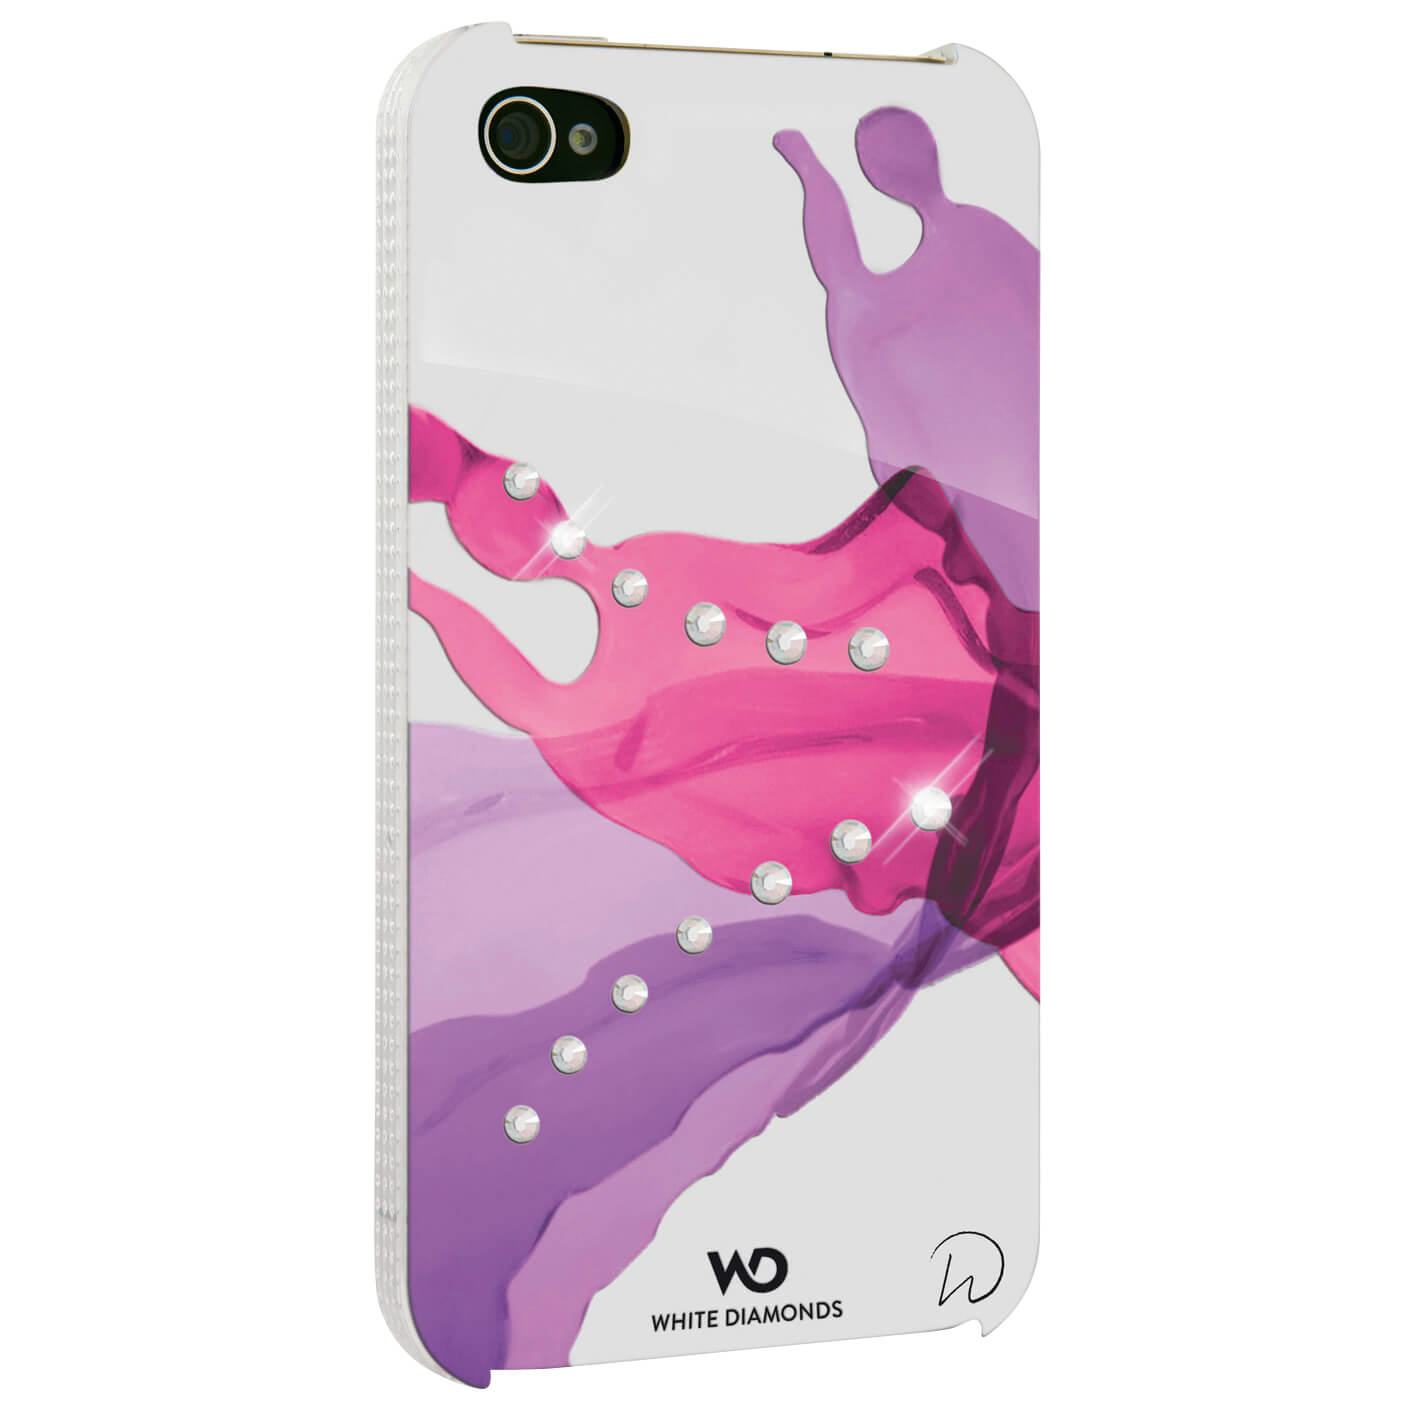 Liquids Mobile Phone Cover fo r Apple iPhone 4/4S, pink